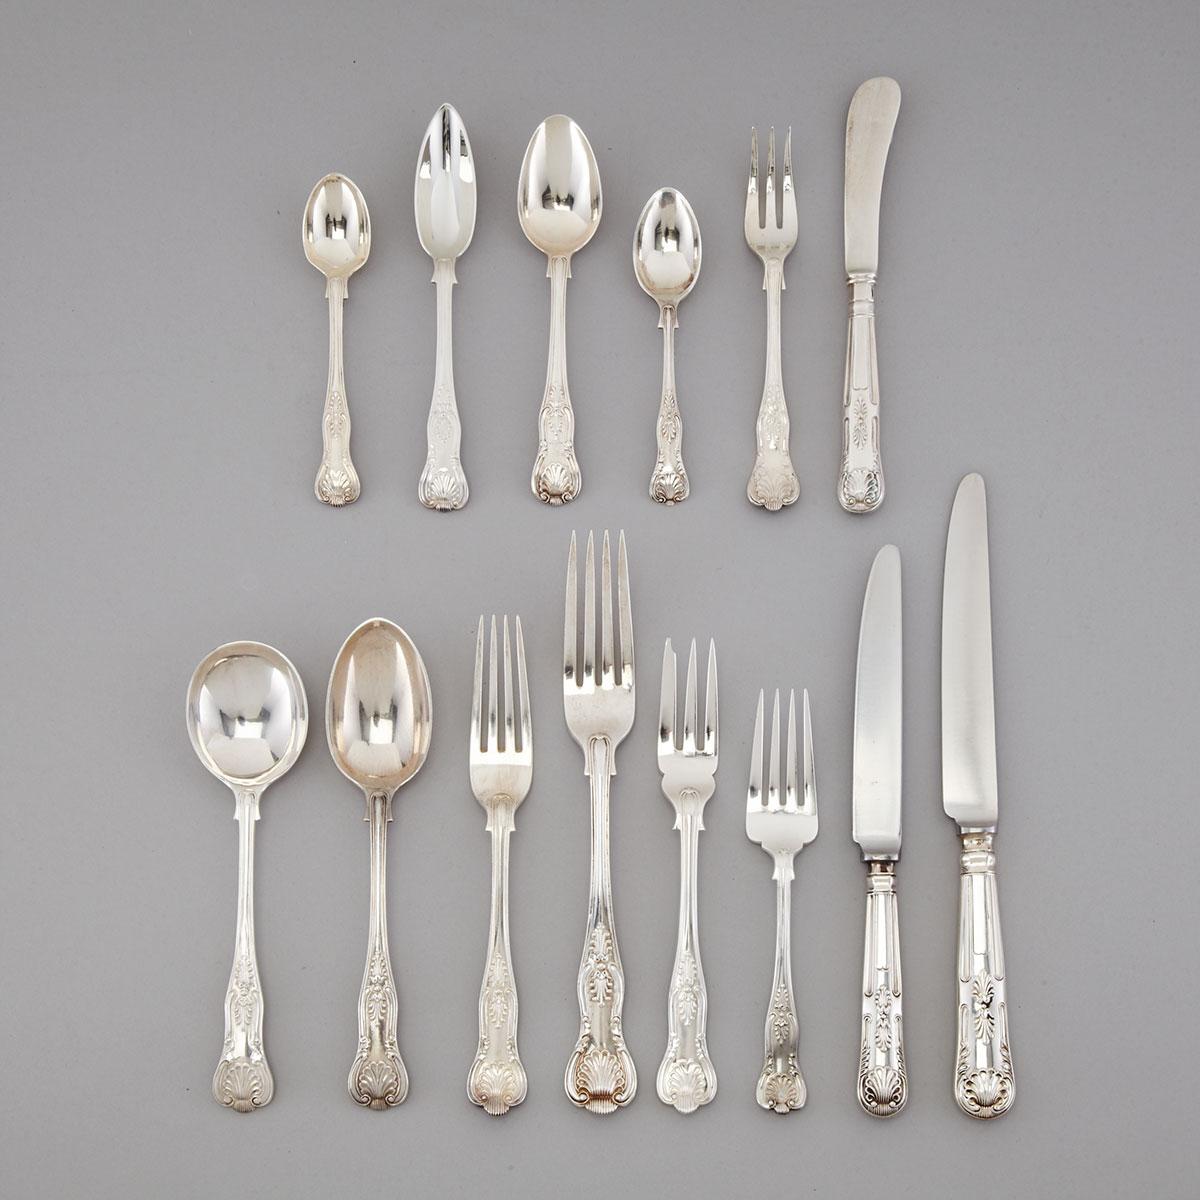 English Silver Kings Pattern Assembled Flatware Service, various makers, 19th/20th century